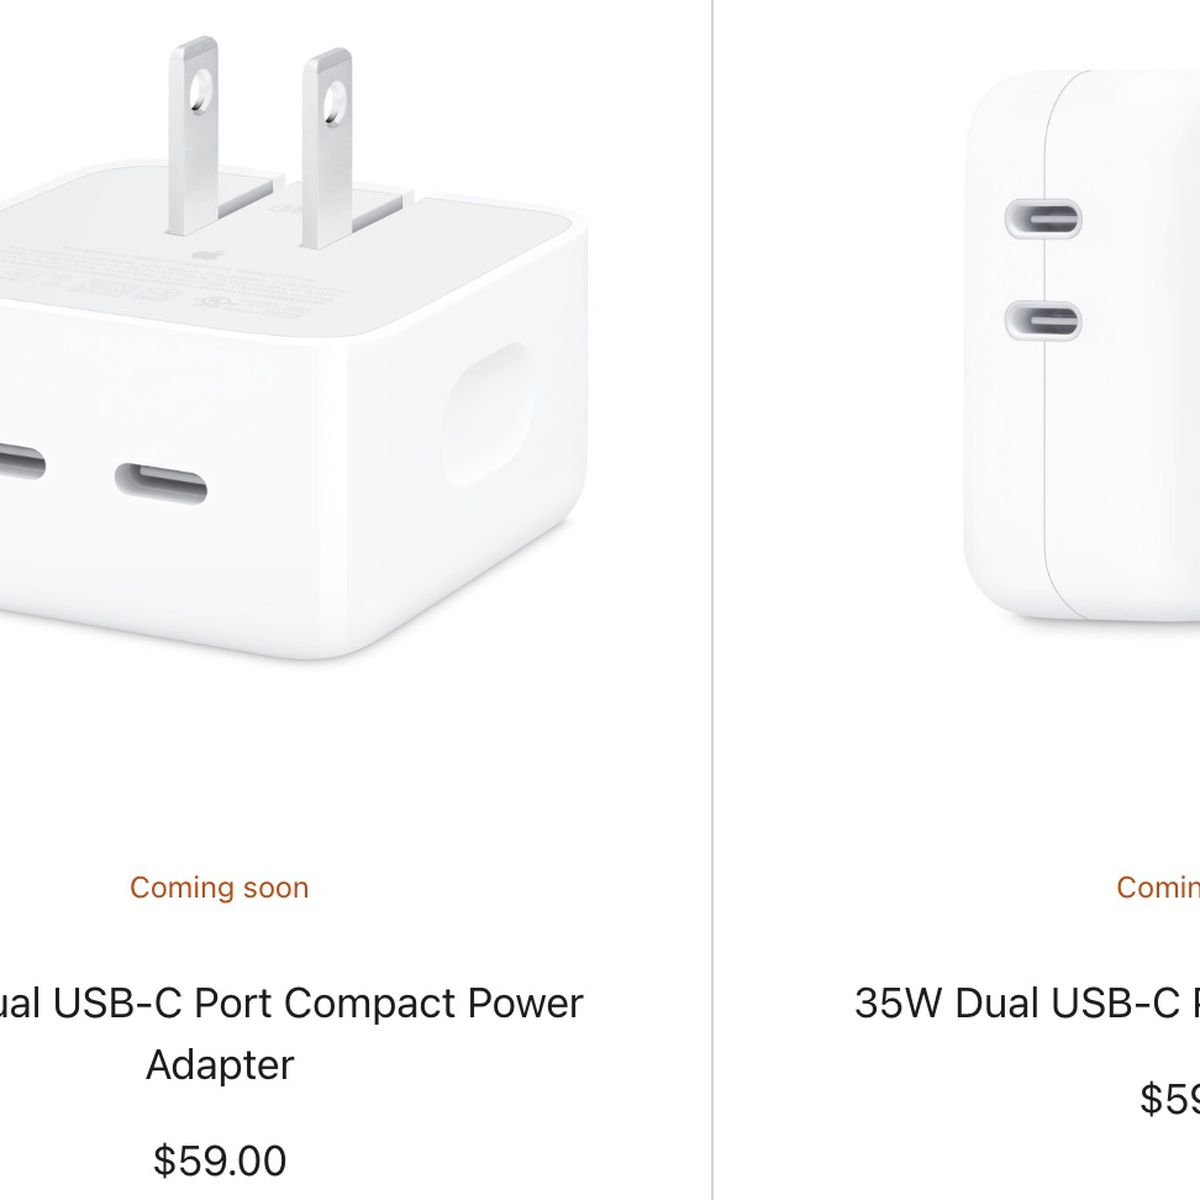 Apple Releasing 35W Power Adapter With Dual USB-C Ports in 